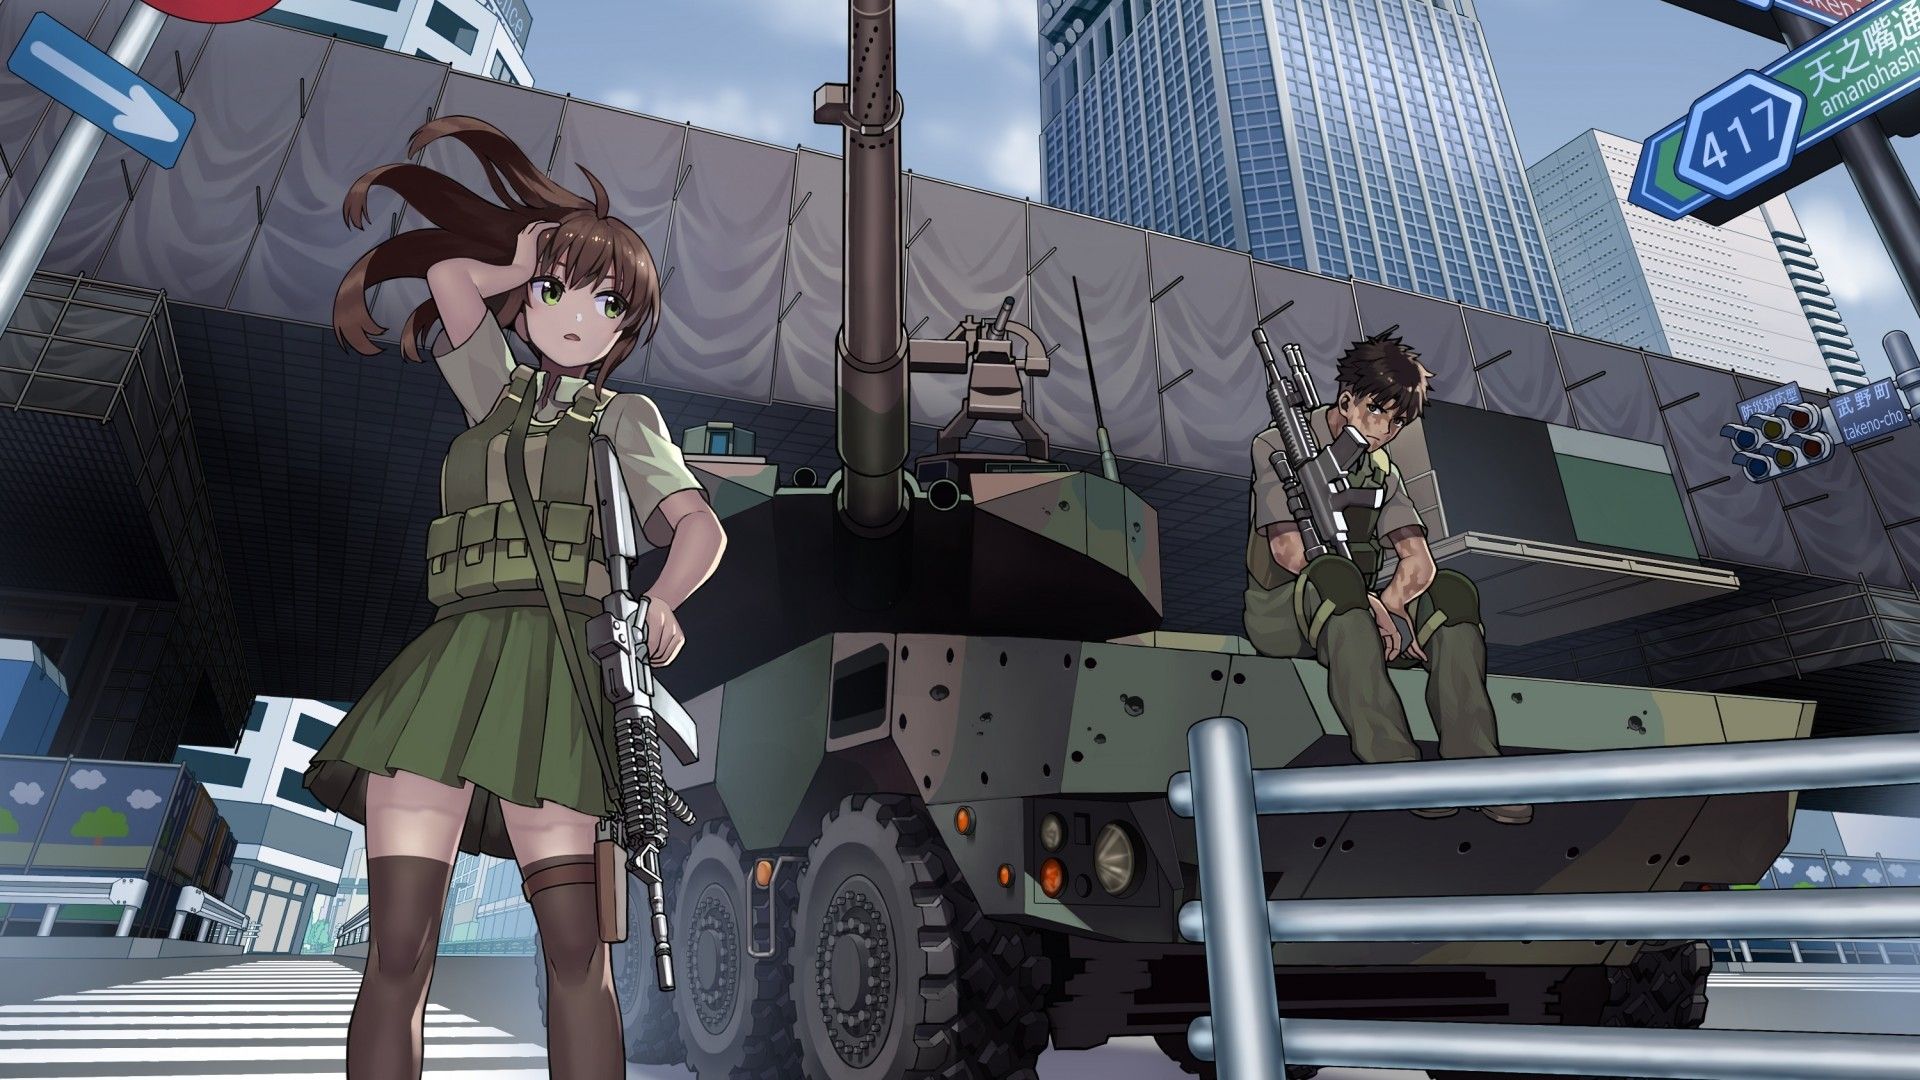 Download 1920x1080 Anime Girl, Soldier, Anime Boy, Military